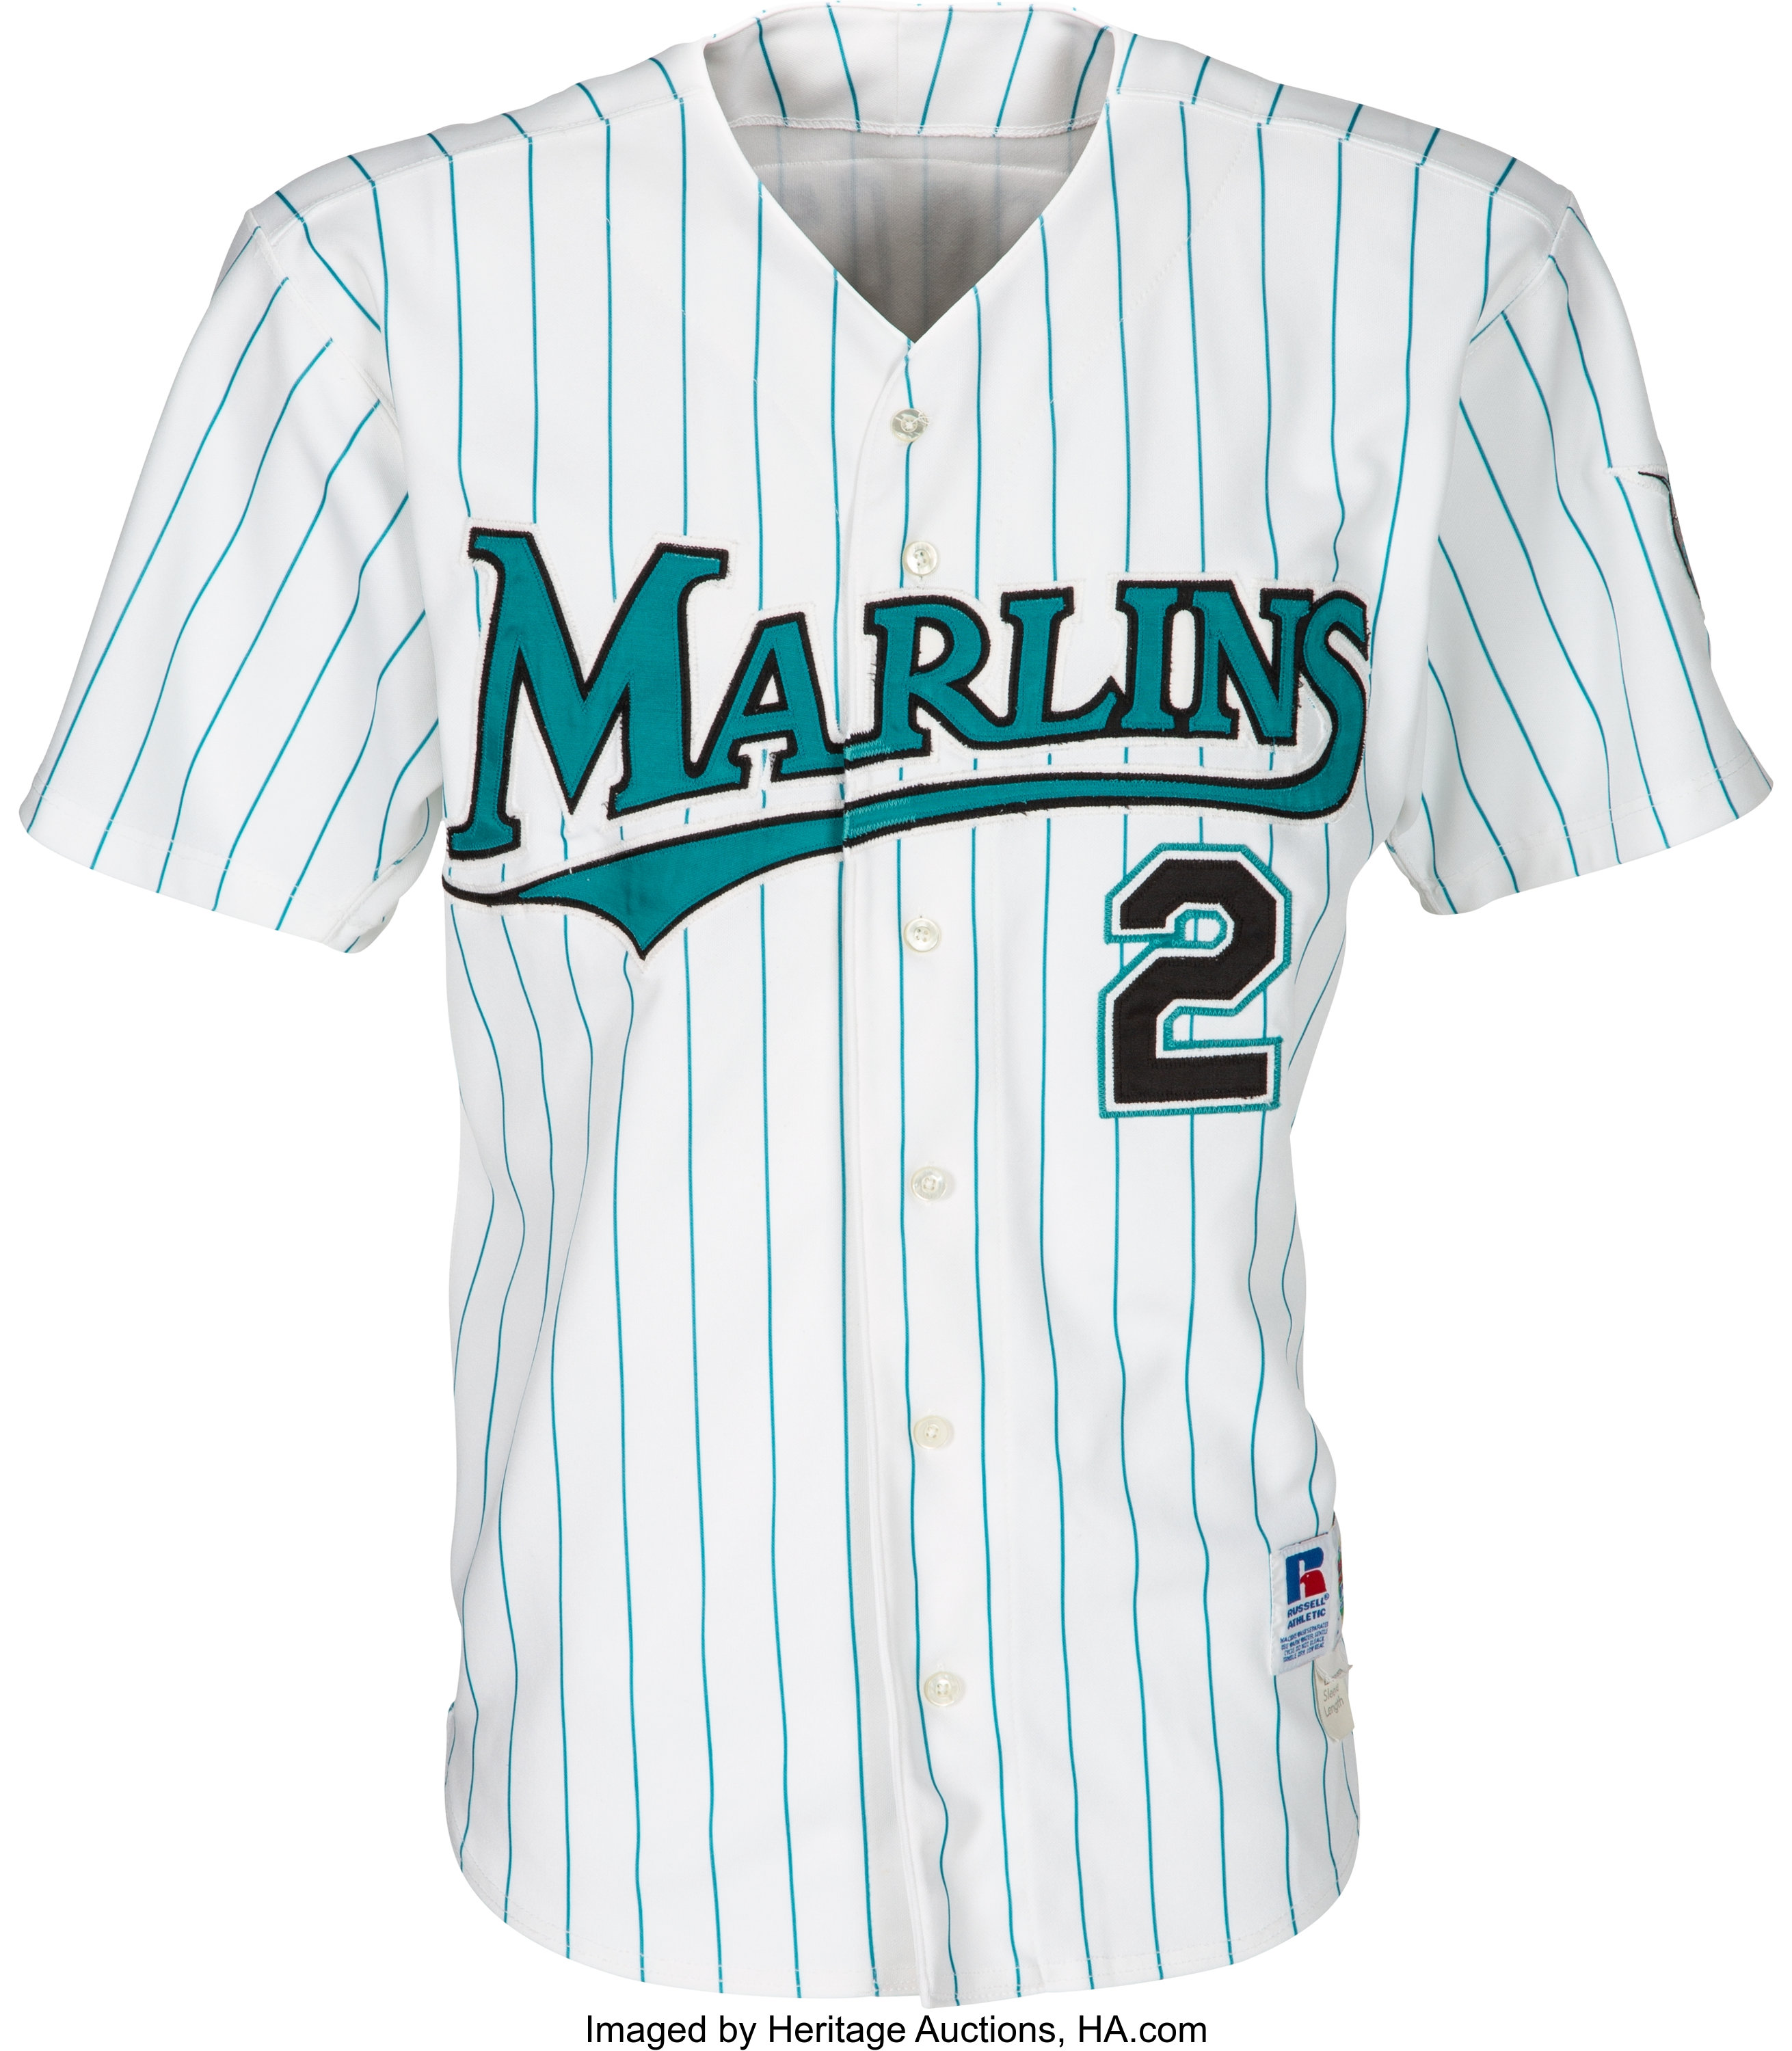 Florida Marlins Hart #20 Game Used White Jersey DP07226 - Game